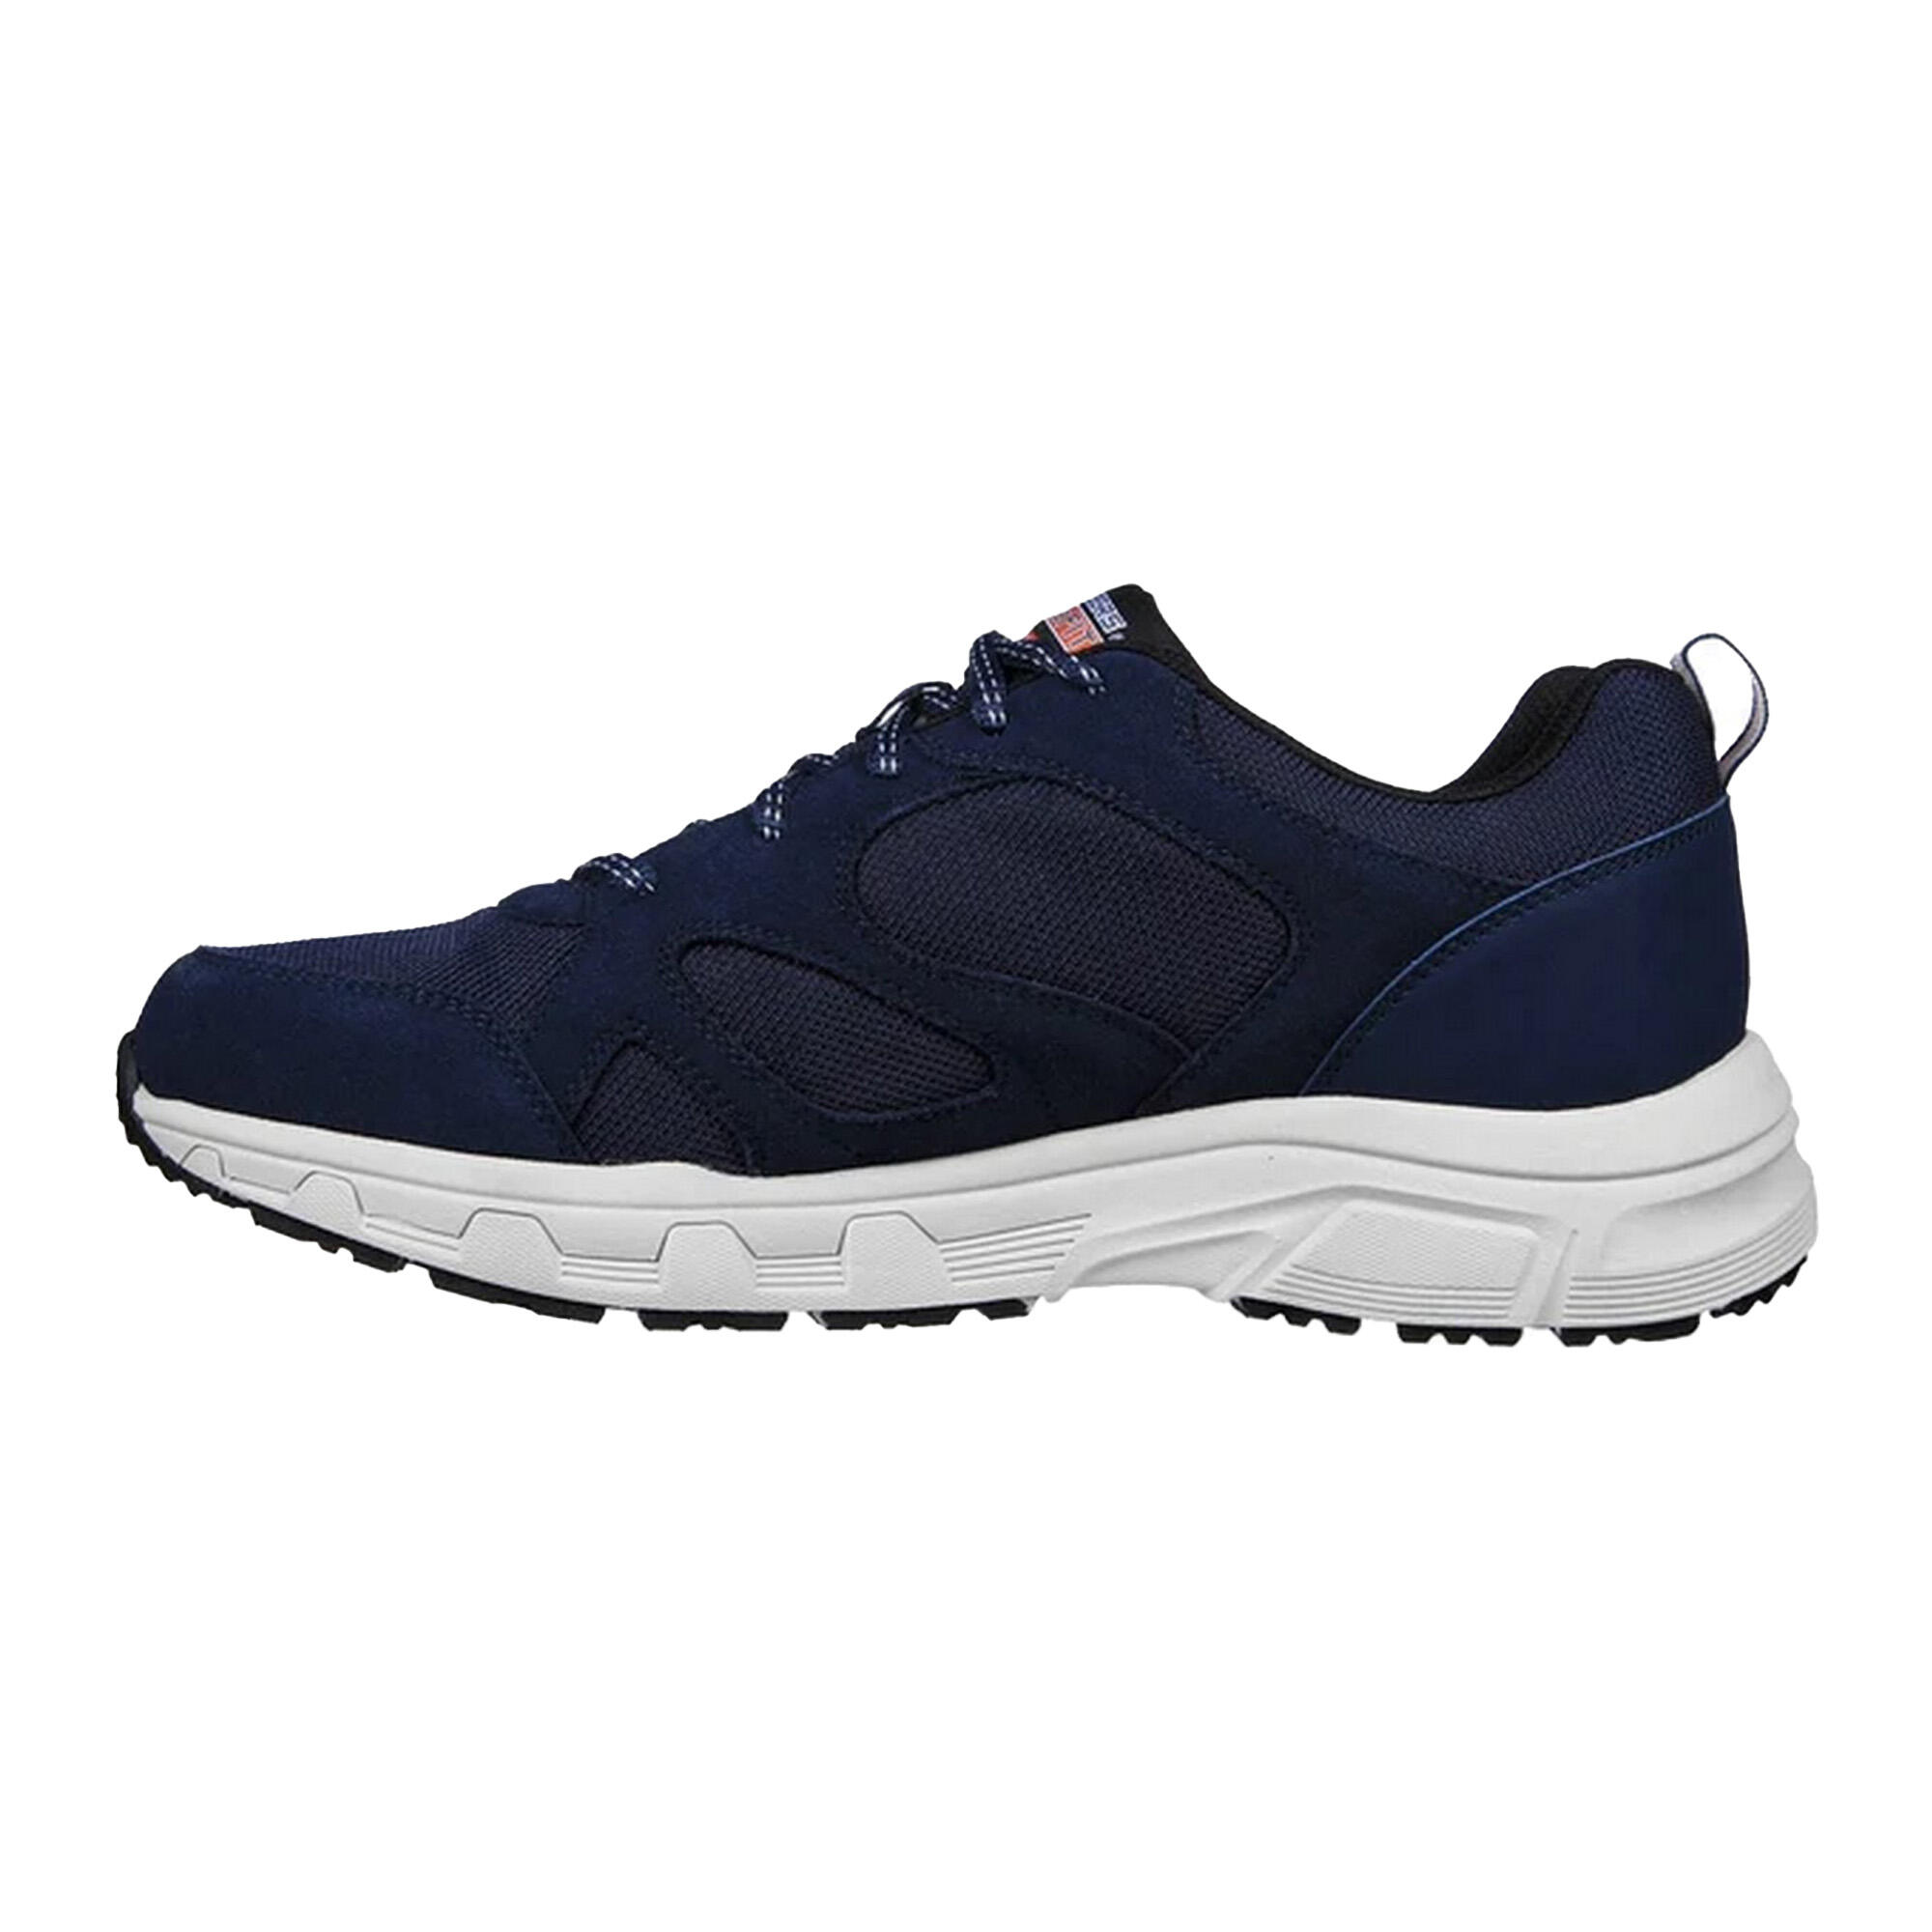 Mens Oak Canyon Sunfair Suede Relaxed Fit Trainers (Navy/Orange) 2/5